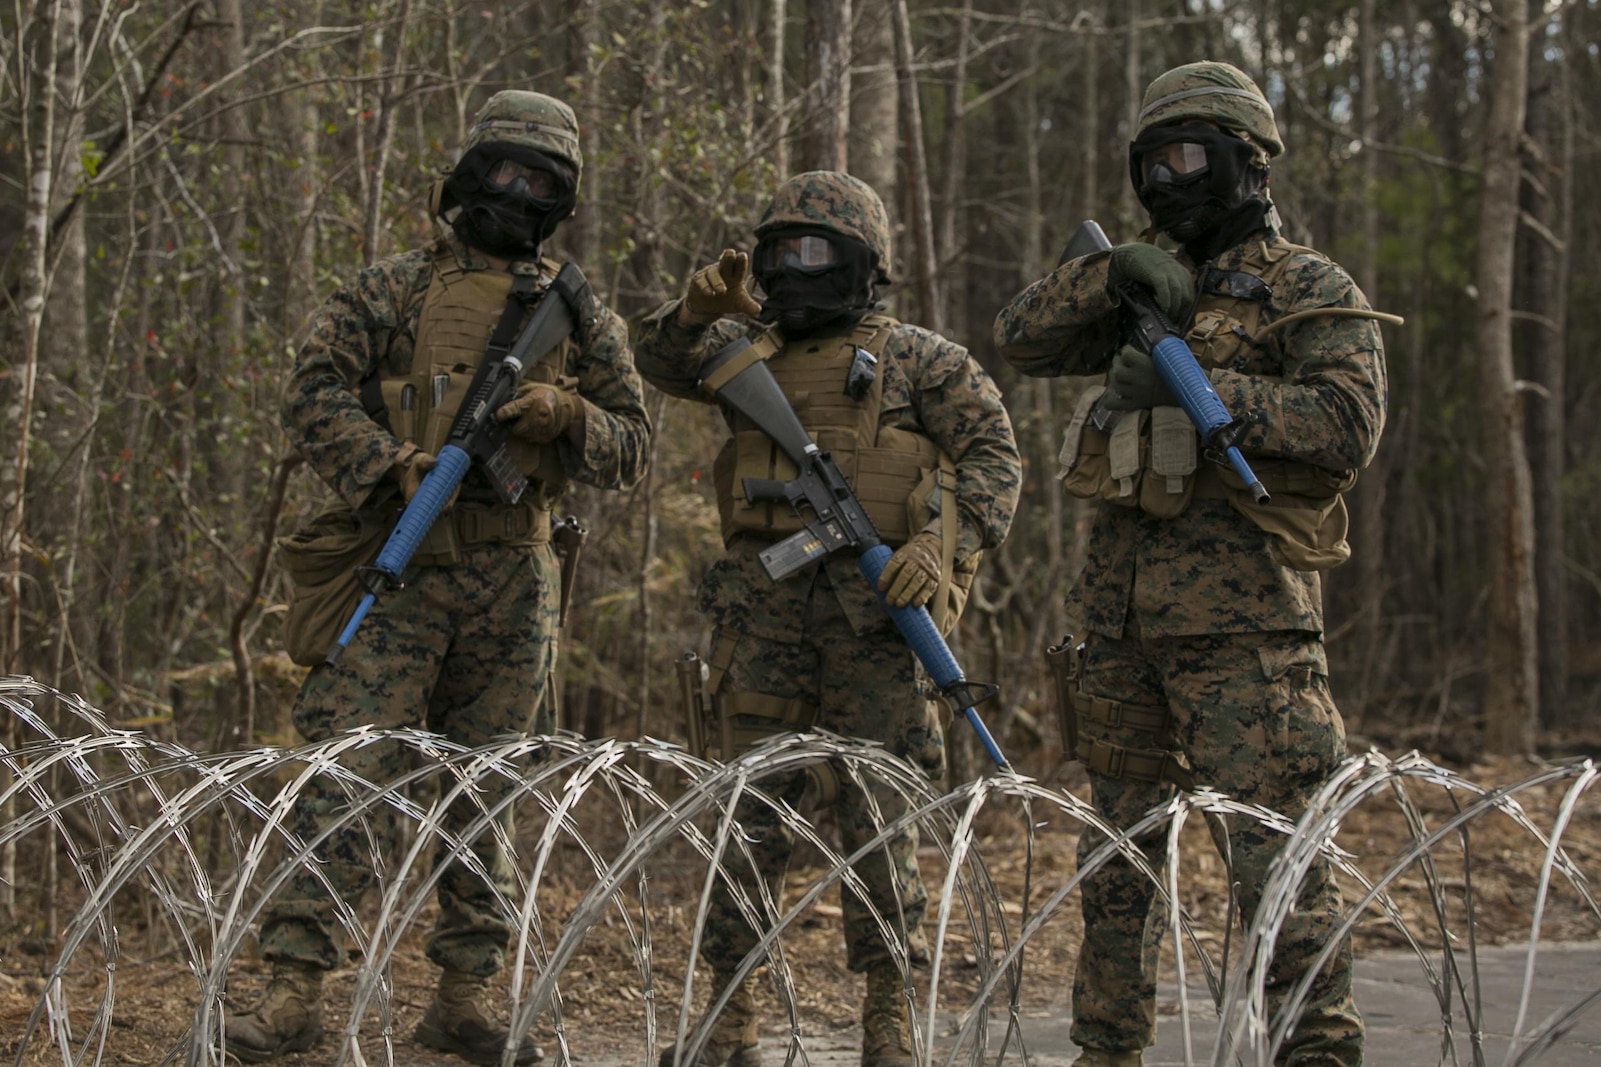 Marines with 2nd Law Enforcement Battalion prepare to confront possible hostiles at Camp Lejeune, N.C., Feb. 9, 2016. This kind of training allows 2nd LEB to develop and practice all the capabilities that the unit brings to the Marine Expeditionary Unit. The obstacles that they faced included rugged environments, improvised explosive devices and ambushes by the enemy. (U.S. Marine Corps photo by Lance Cpl. Luke Hoogendam/Released)